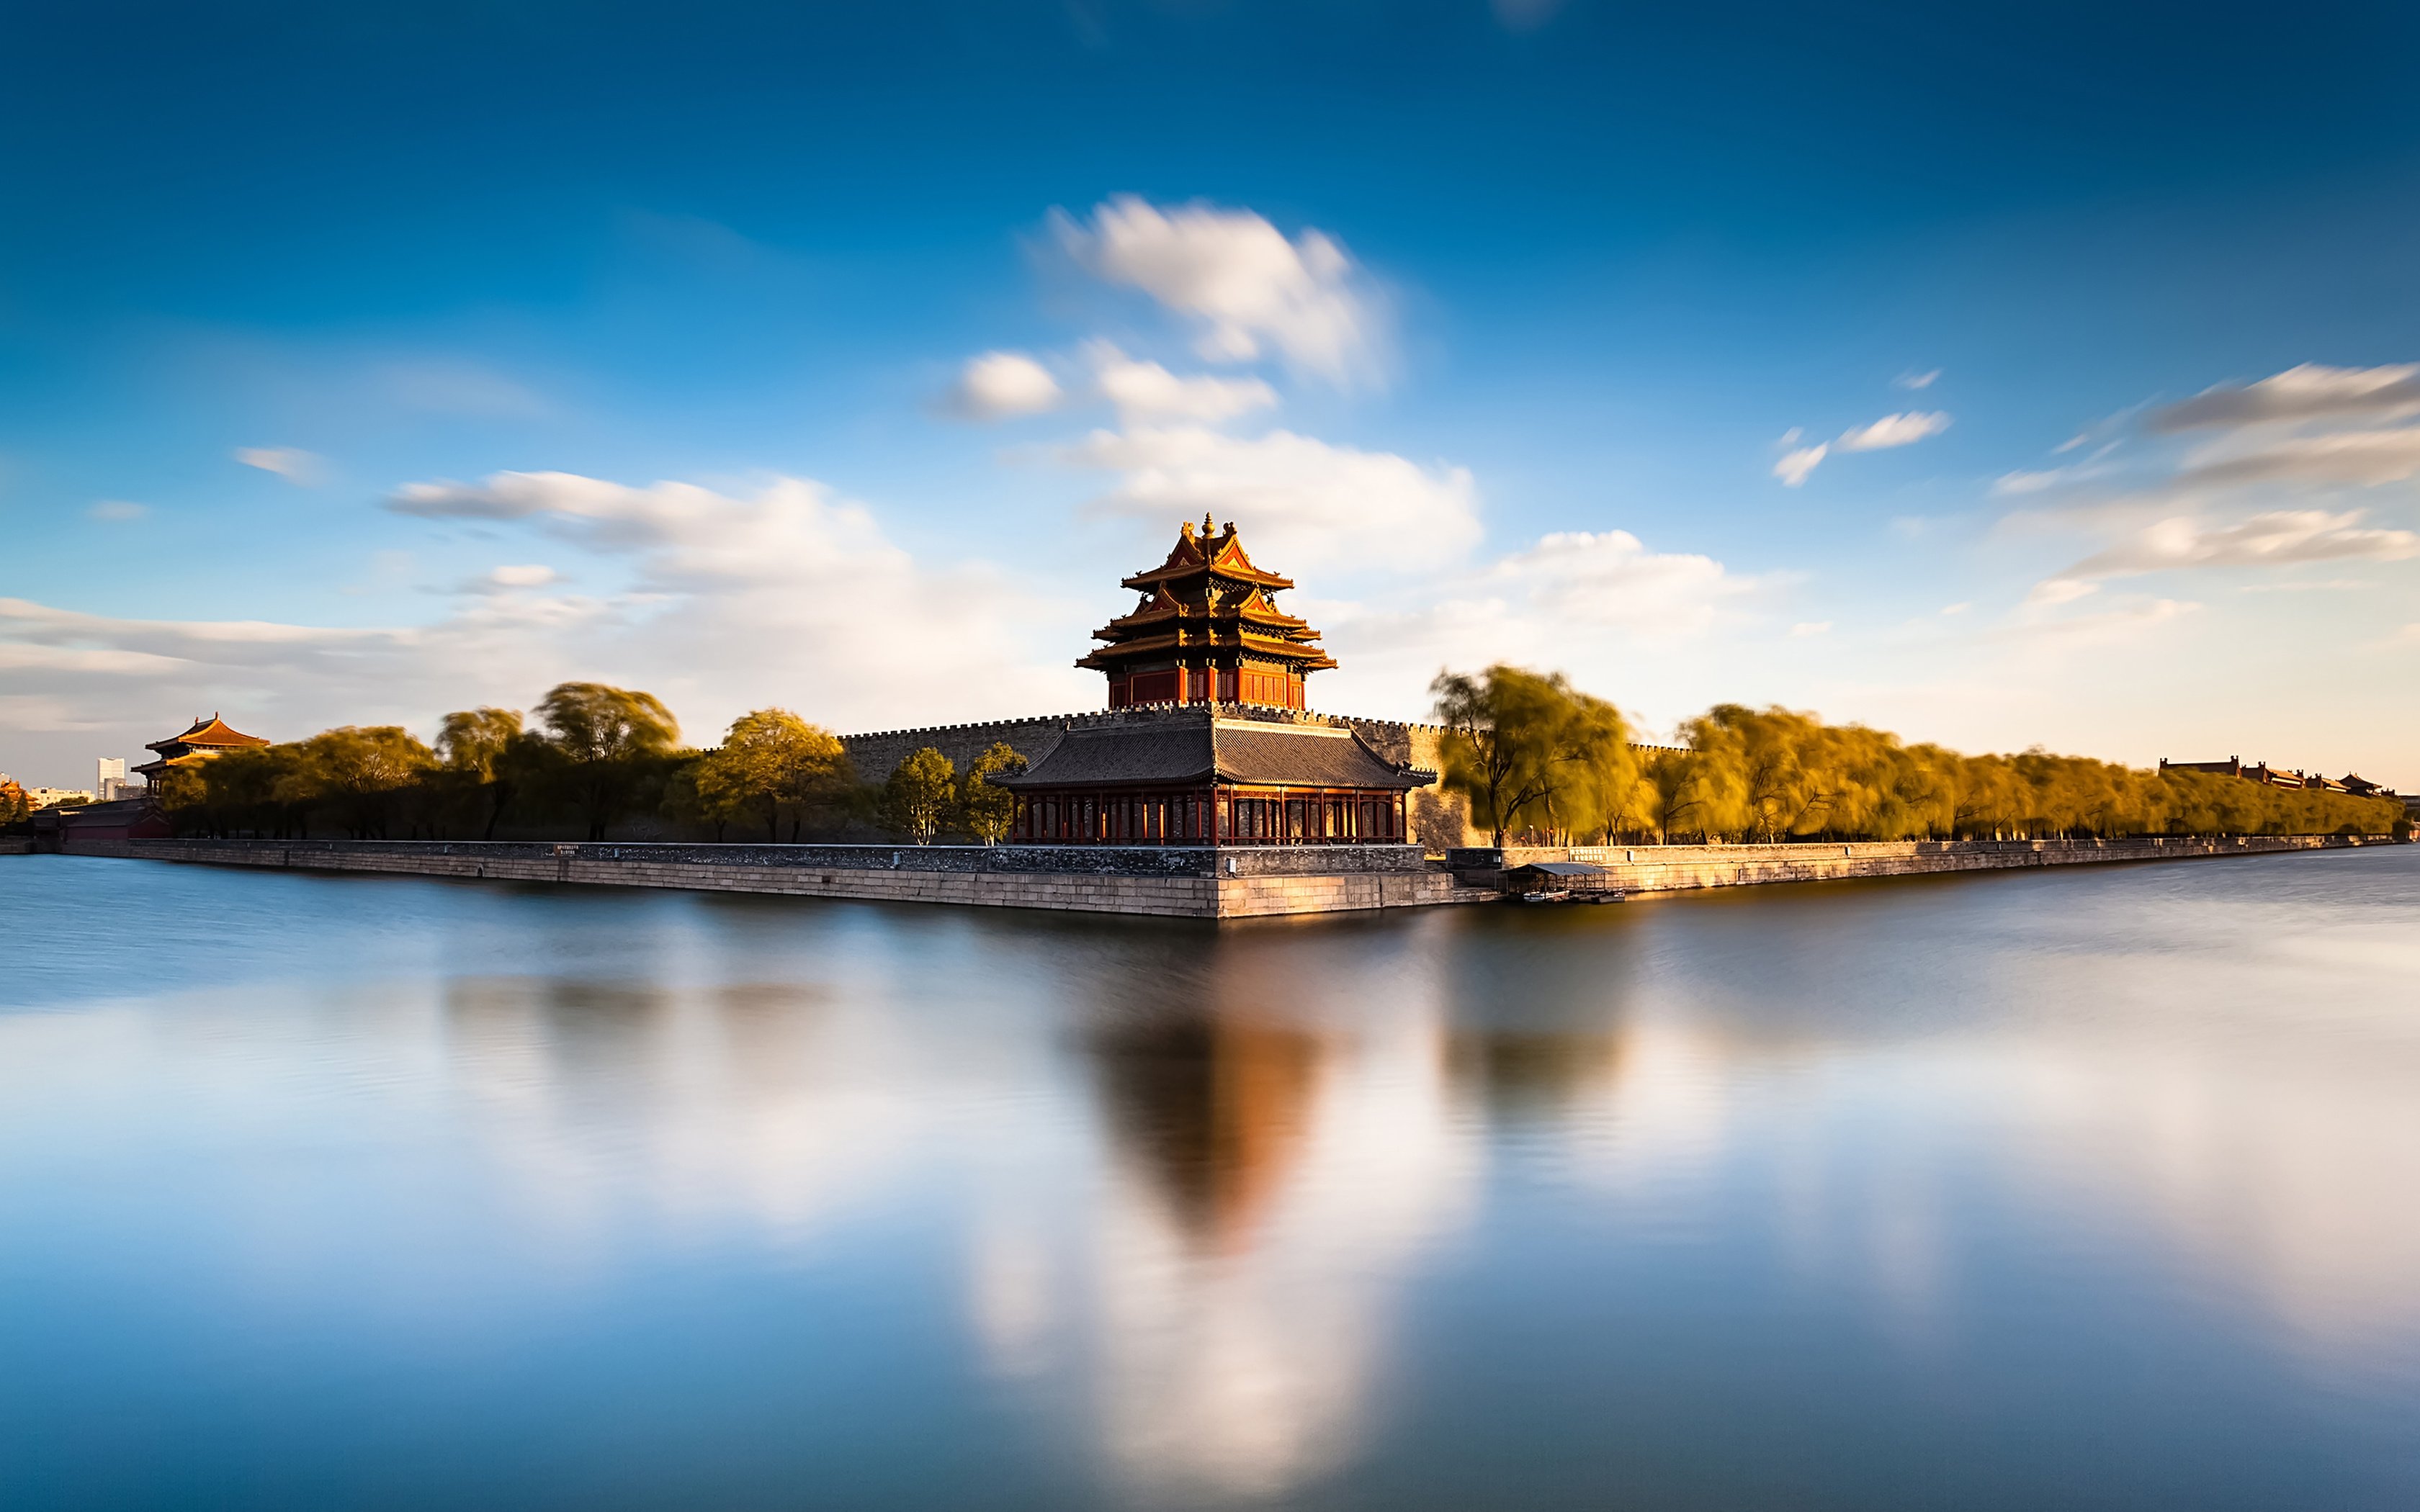 forbidden, City, Beijing, China, The, Palace, Moat, Water, Castle Wallpaper